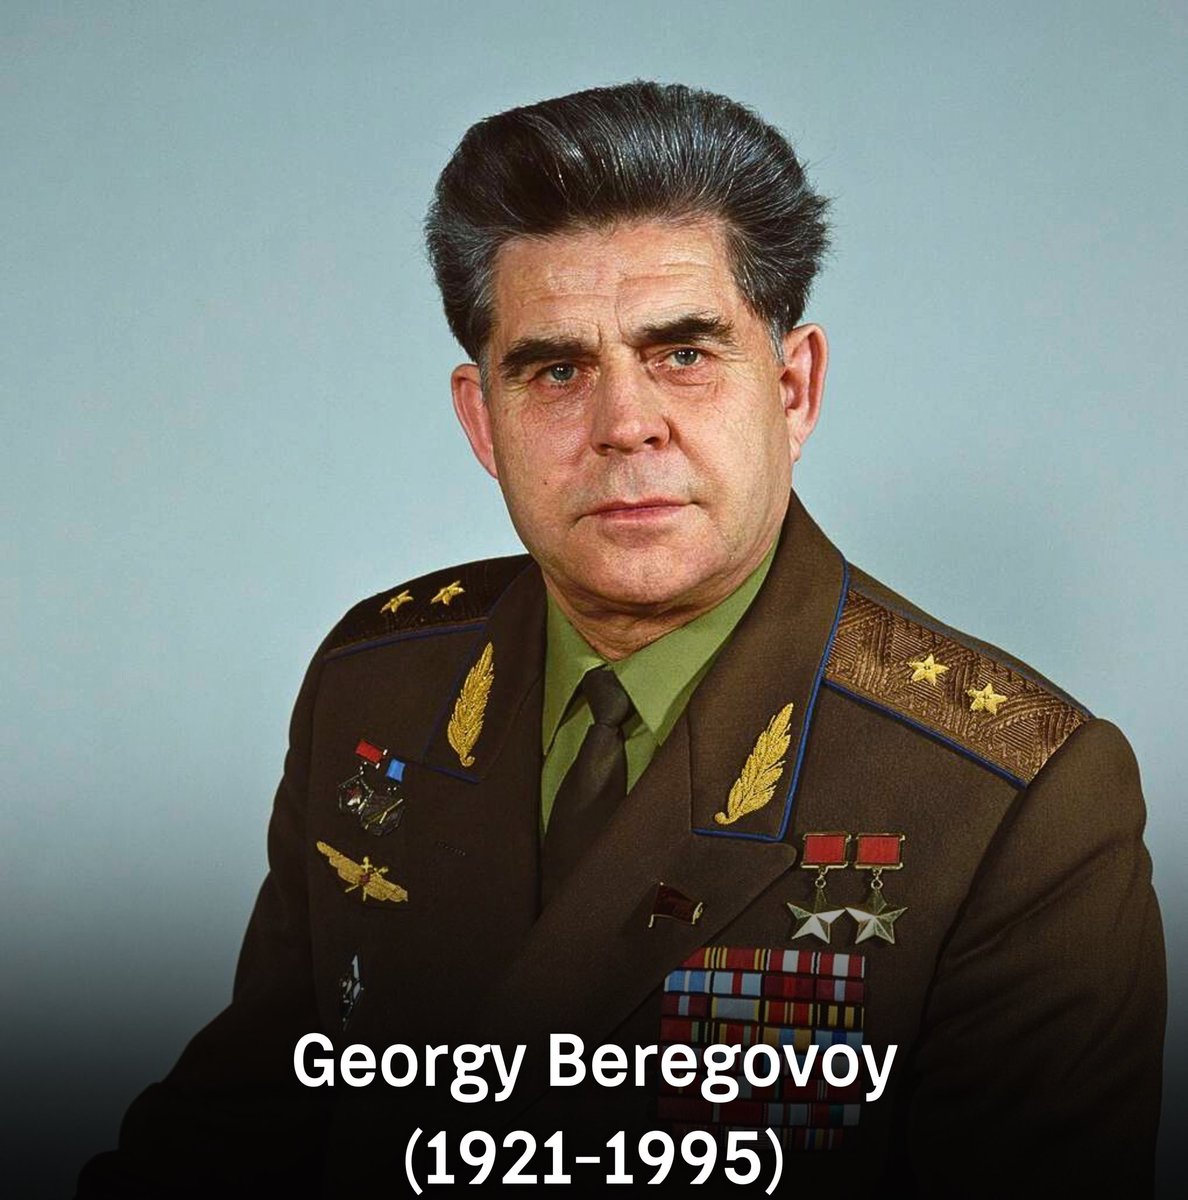 🗓️ On April 15, 1921 Soviet cosmonaut Georgy Beregovoy was born 🚀 Over «Soyuz 3» expedition spent 3 days 22 hours 50 minutes 40 seconds in space ⭐️ Twice Hero of the Soviet Union (the only one awarded the first star for the Great Patriotic War and the second for space flight)